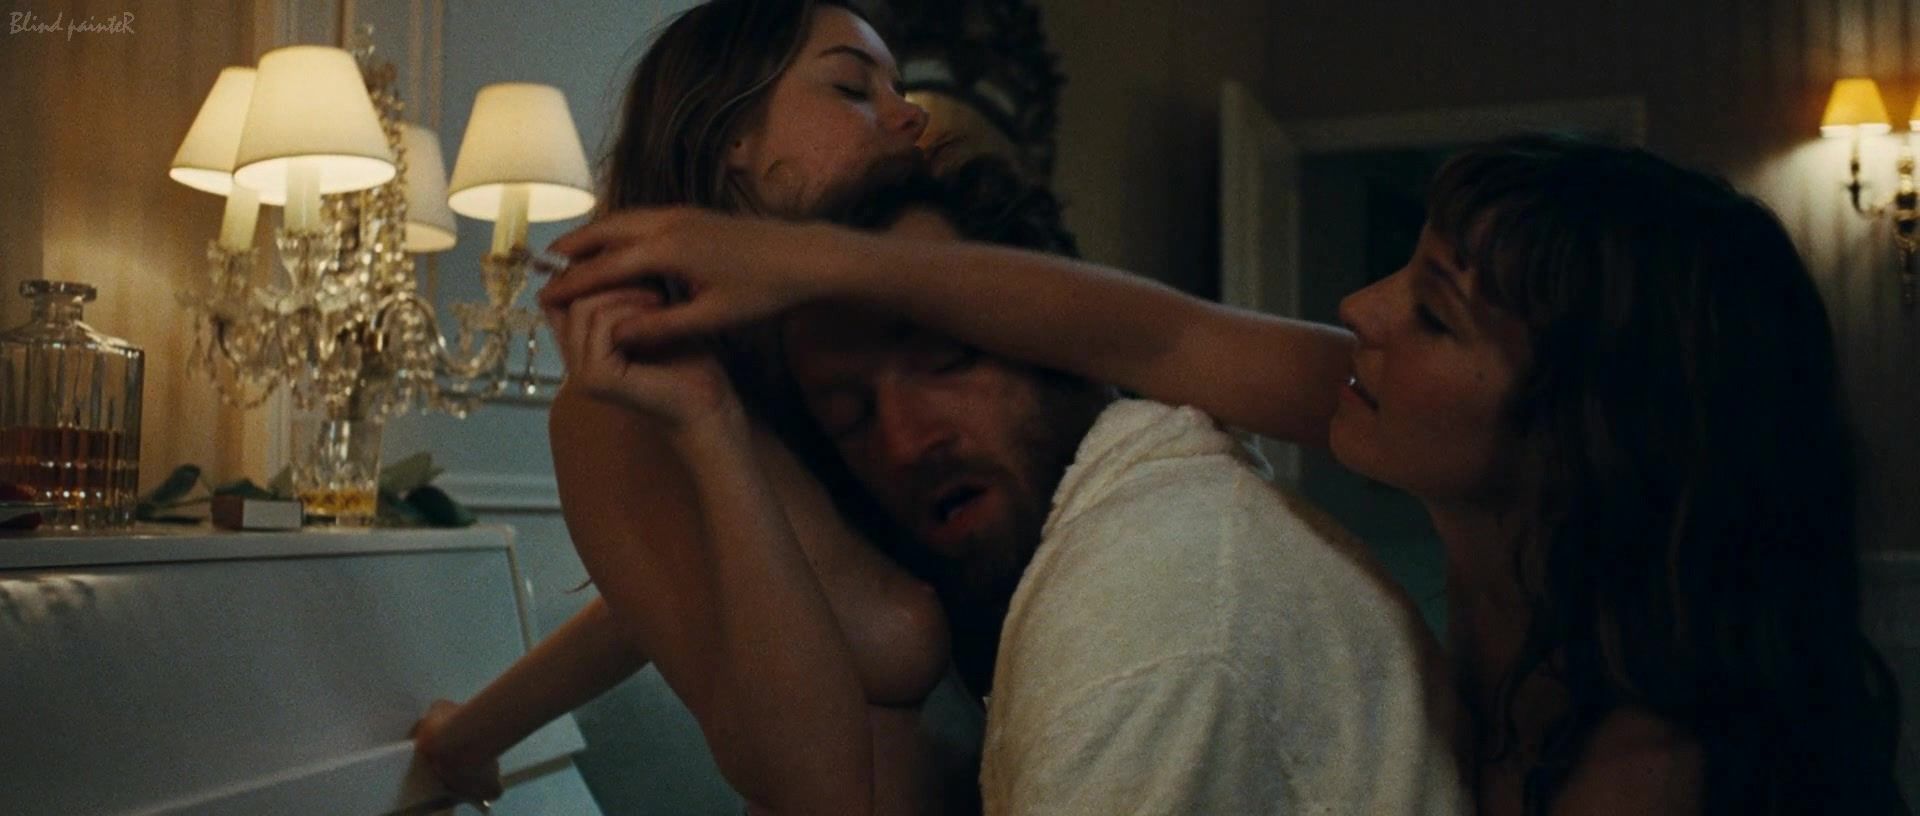 TrannySmuts Sex video Camille Rowe - Our Day Will Come (Notre Jour Viendra) (2010) Storyline